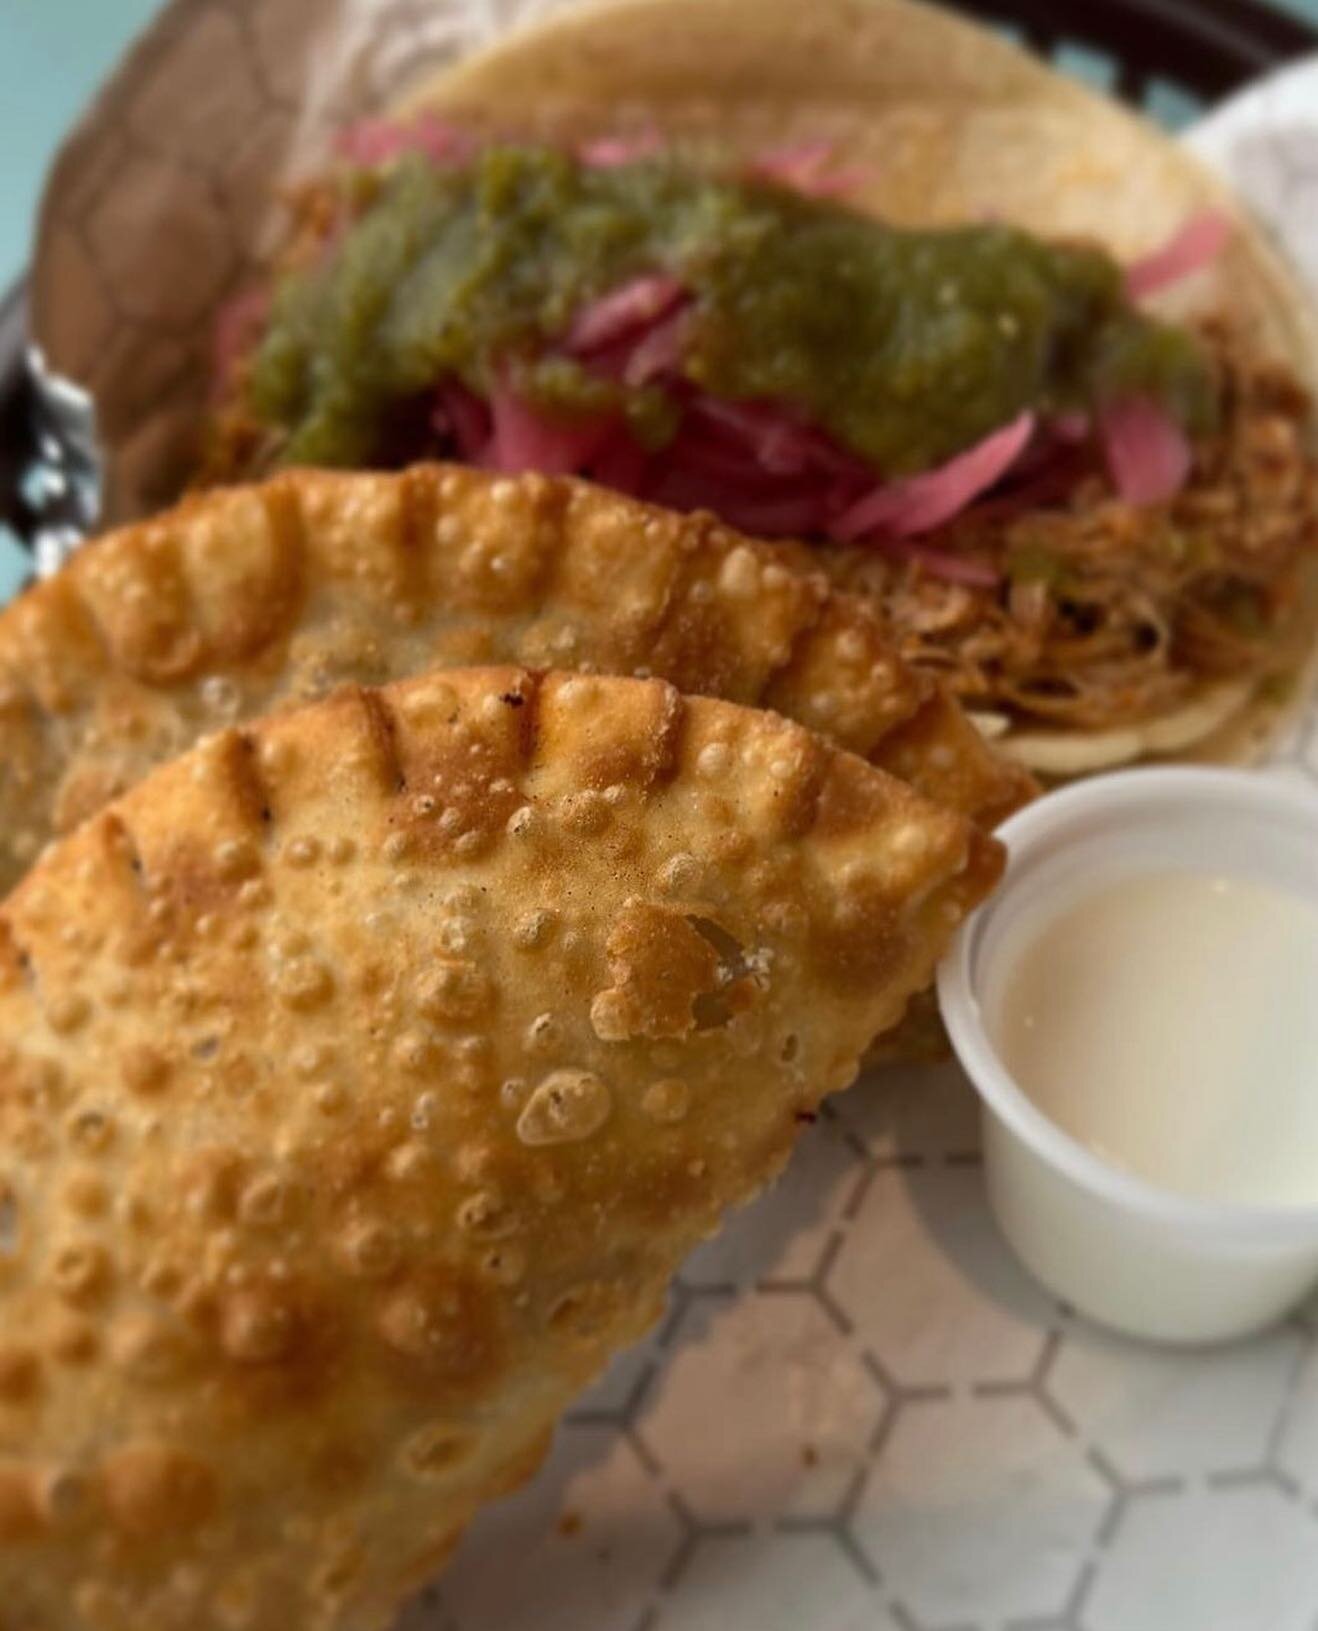 Todays Special 
2 ground beef and cheese empanadas and a chicken taco comes with our aqua fresca 9$ 

#daily #special #empanadas #tacos #fortworthchef #fw #nearsouthside